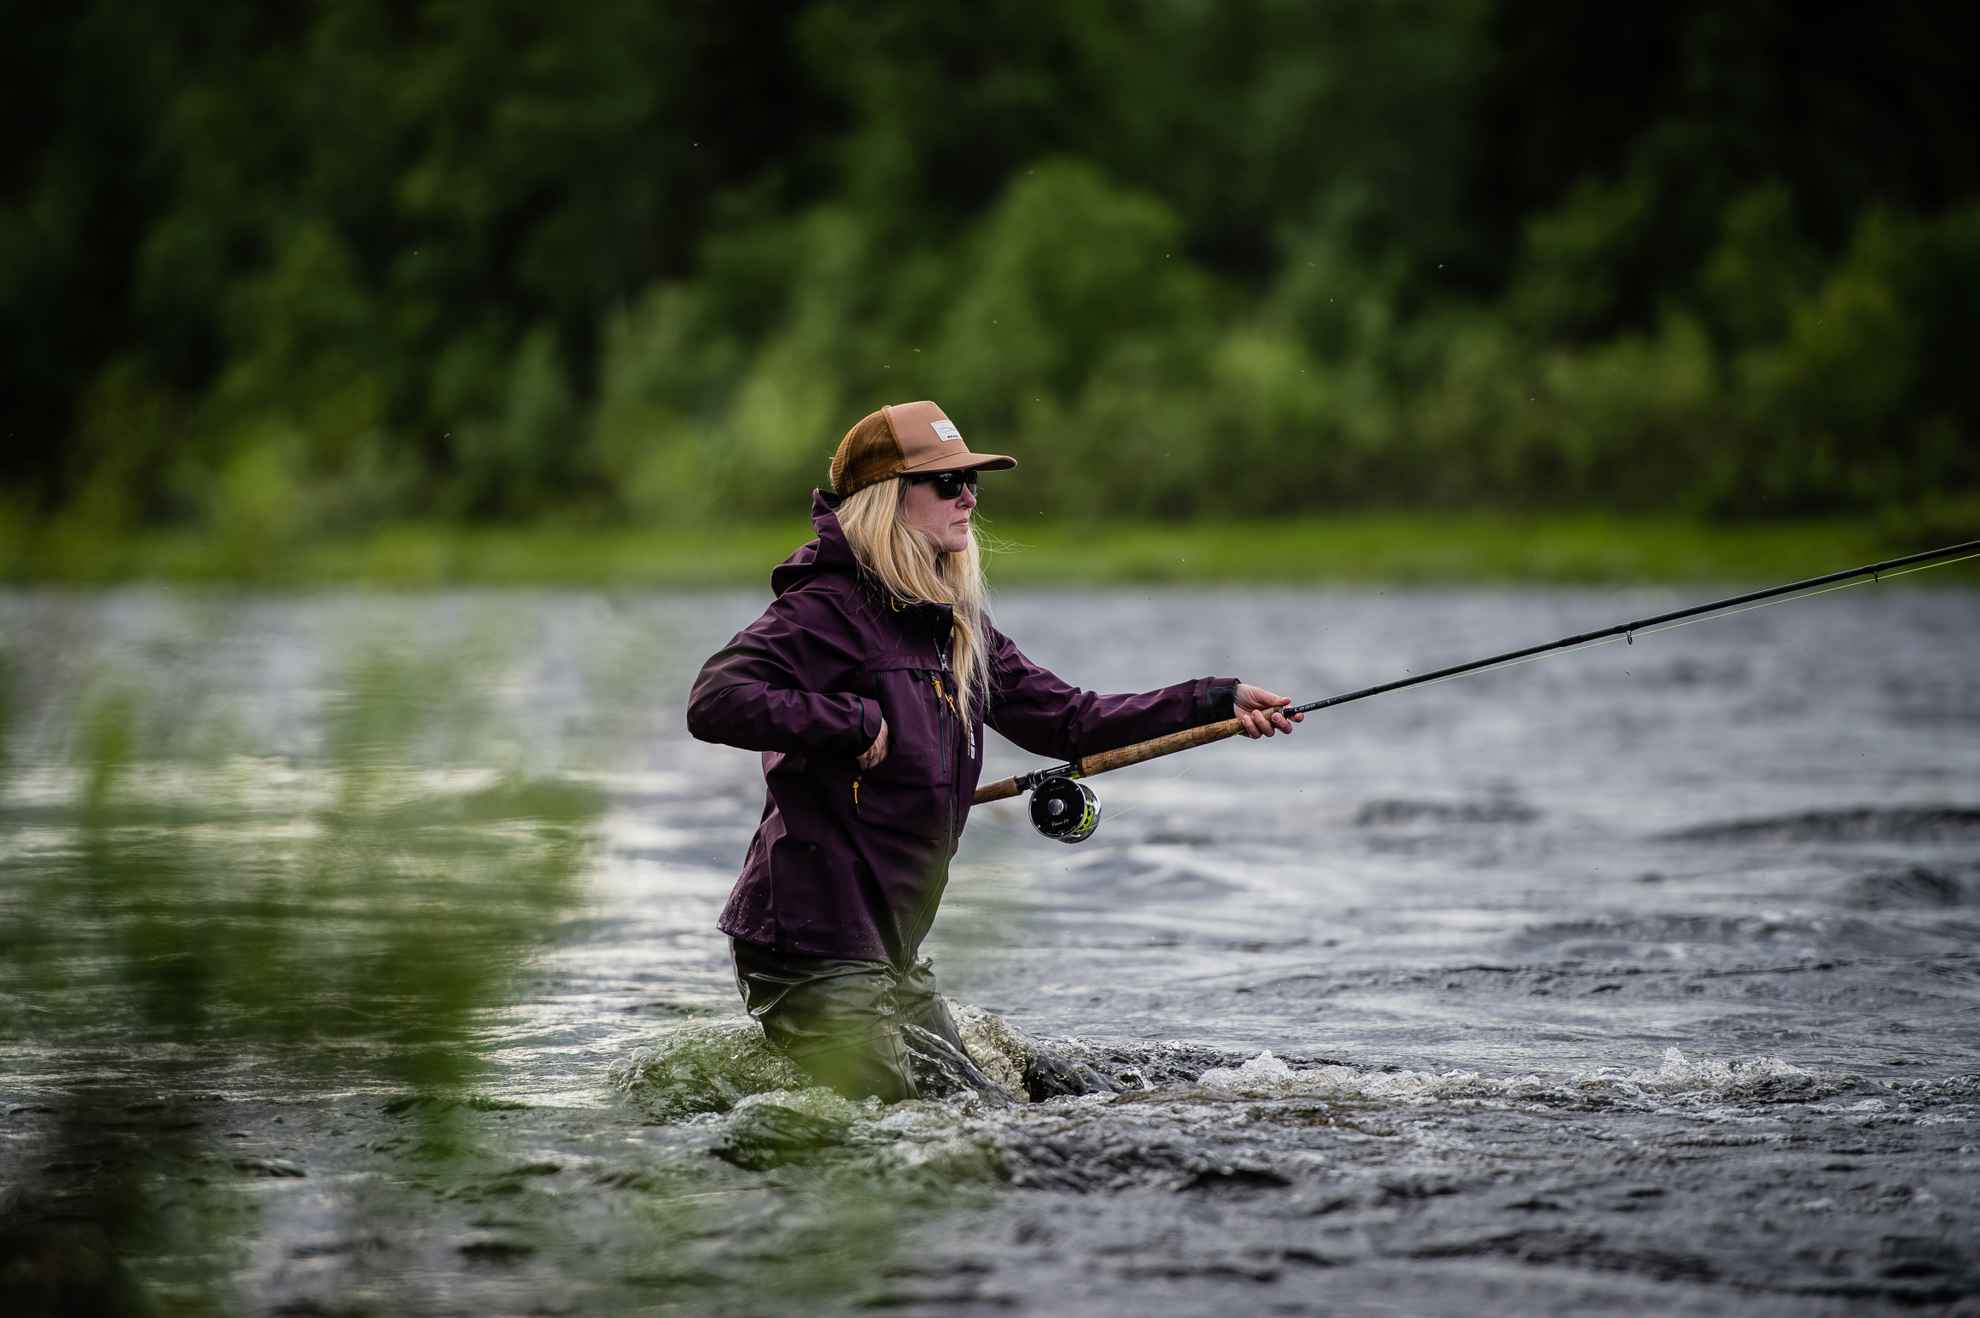 A girl is fly fishing in a river.